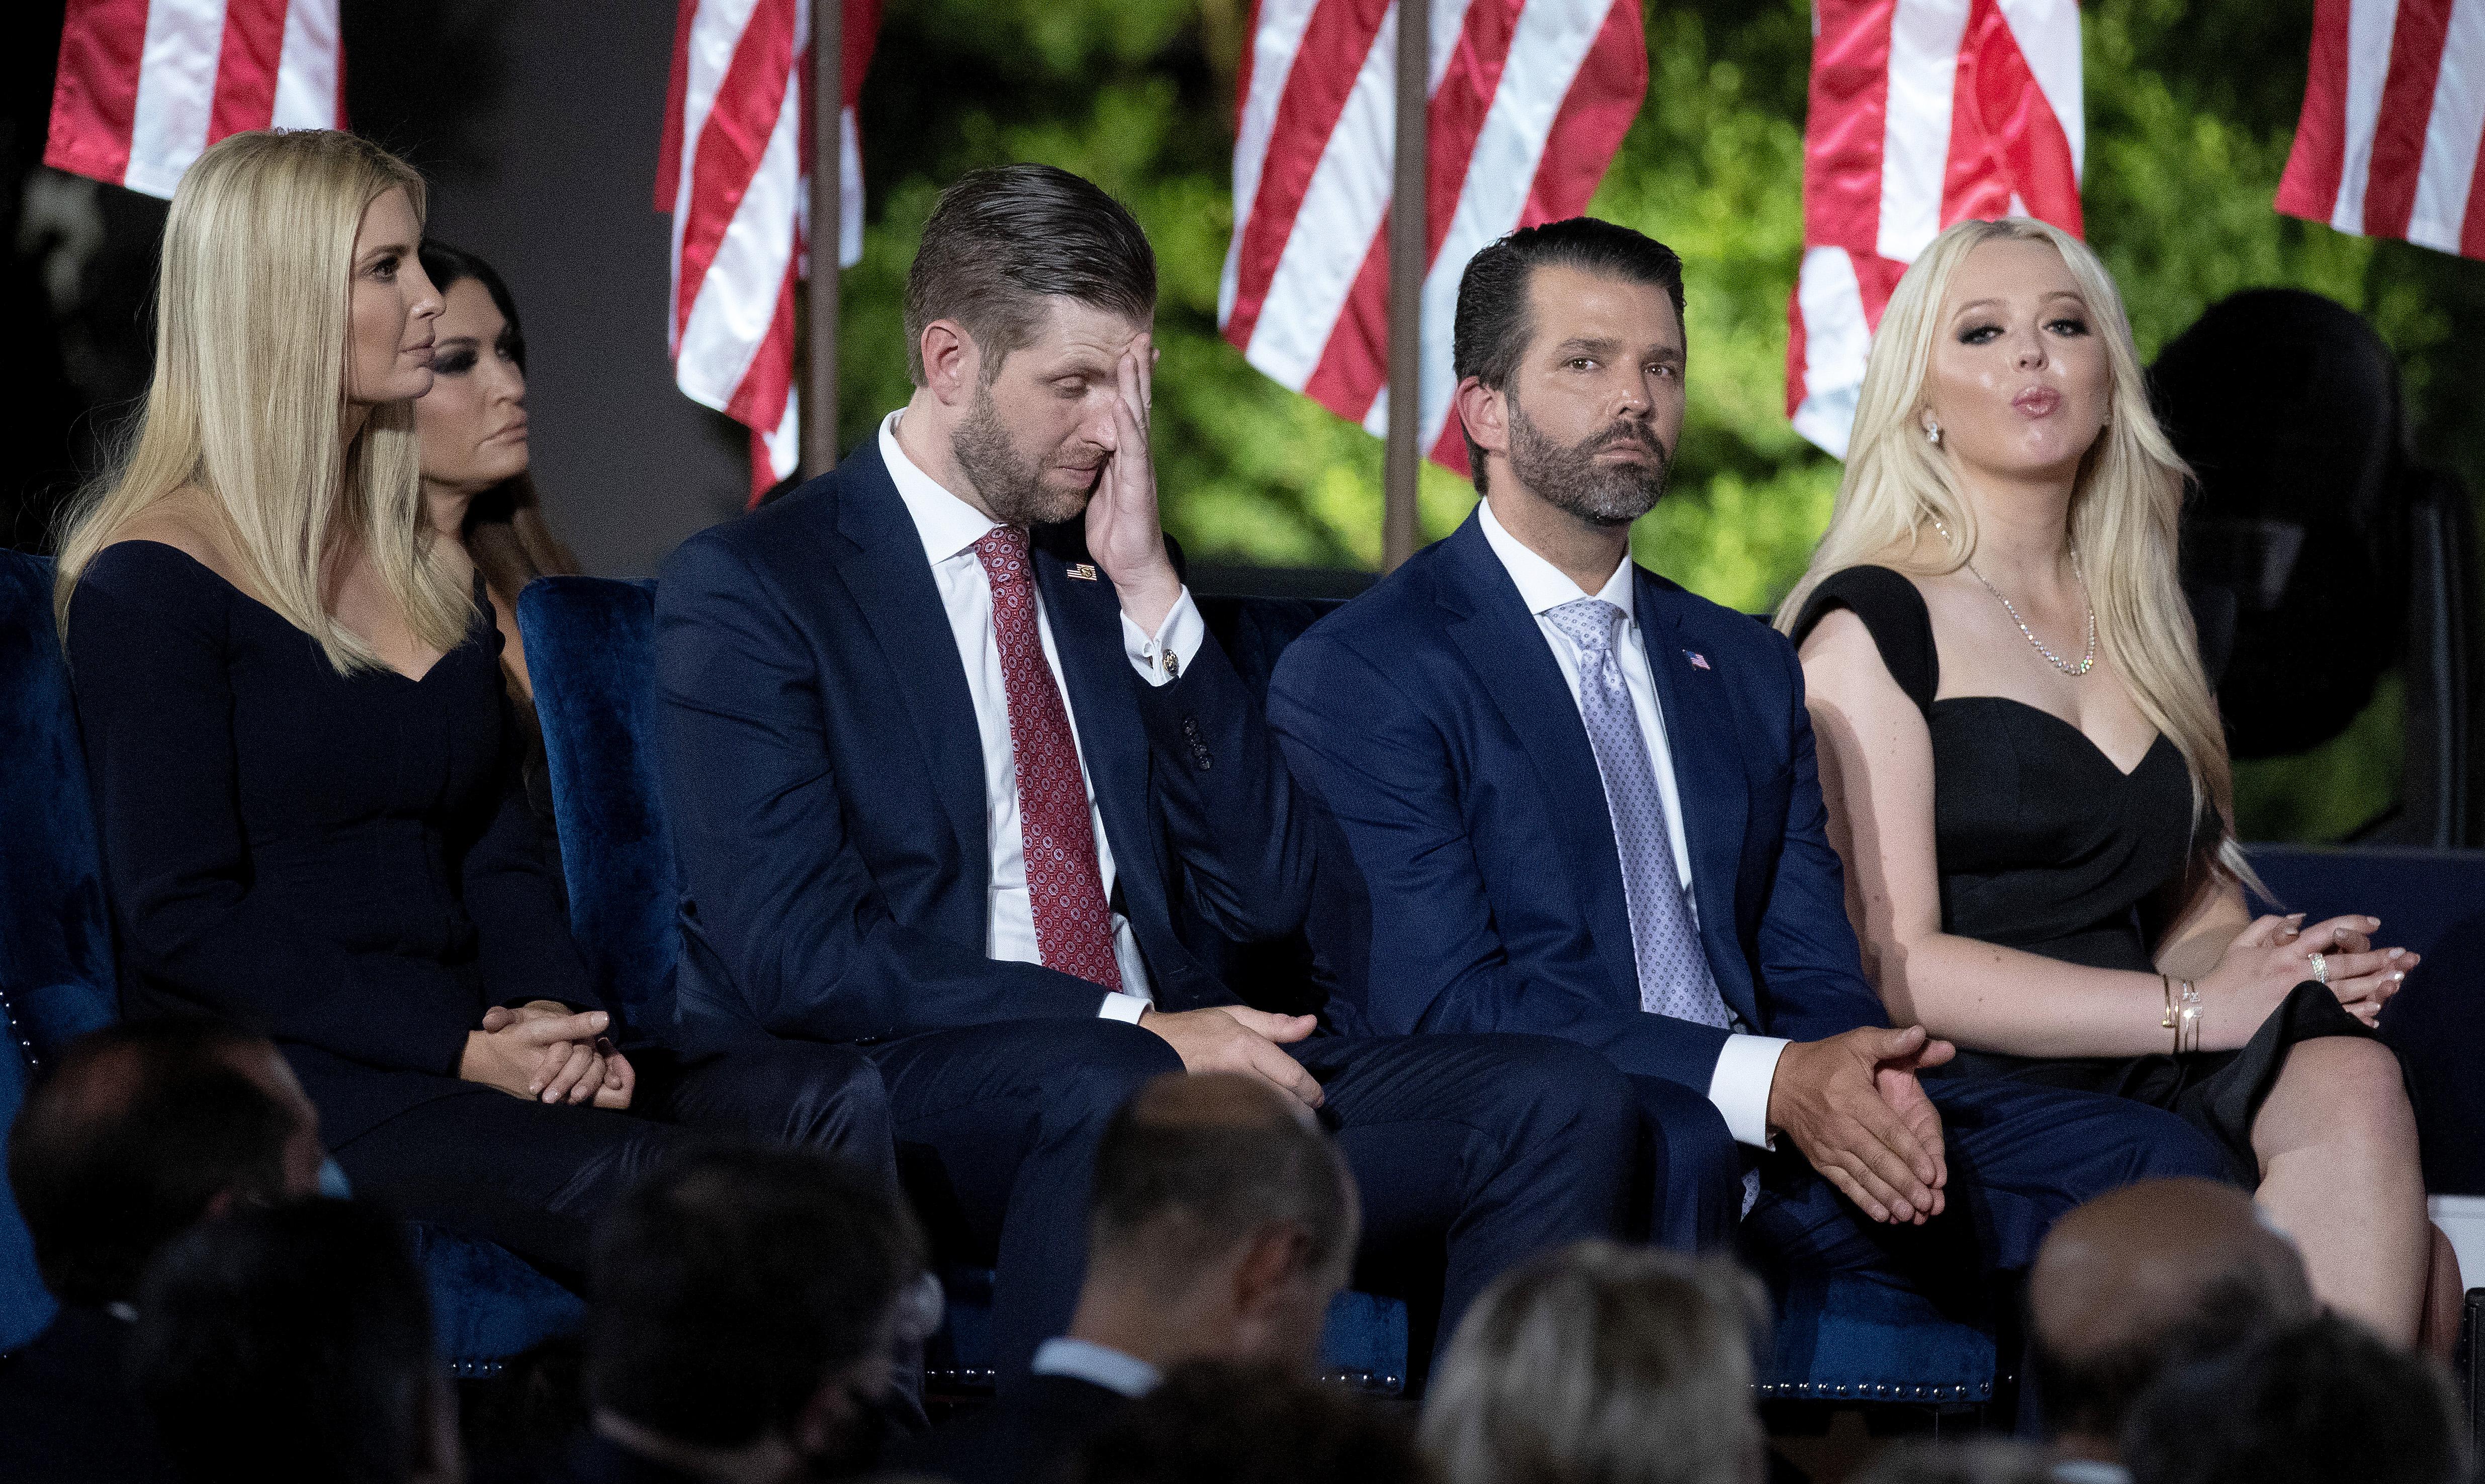 U.S. President Donald Trump's children, (L-R) Ivanka Trump, Eric Trump, Donald Trump Jr. and Tiffany Trump, sit on the stage as their father delivers his 70-minute acceptance speech for the Republican presidential nomination on the South Lawn of the White House.